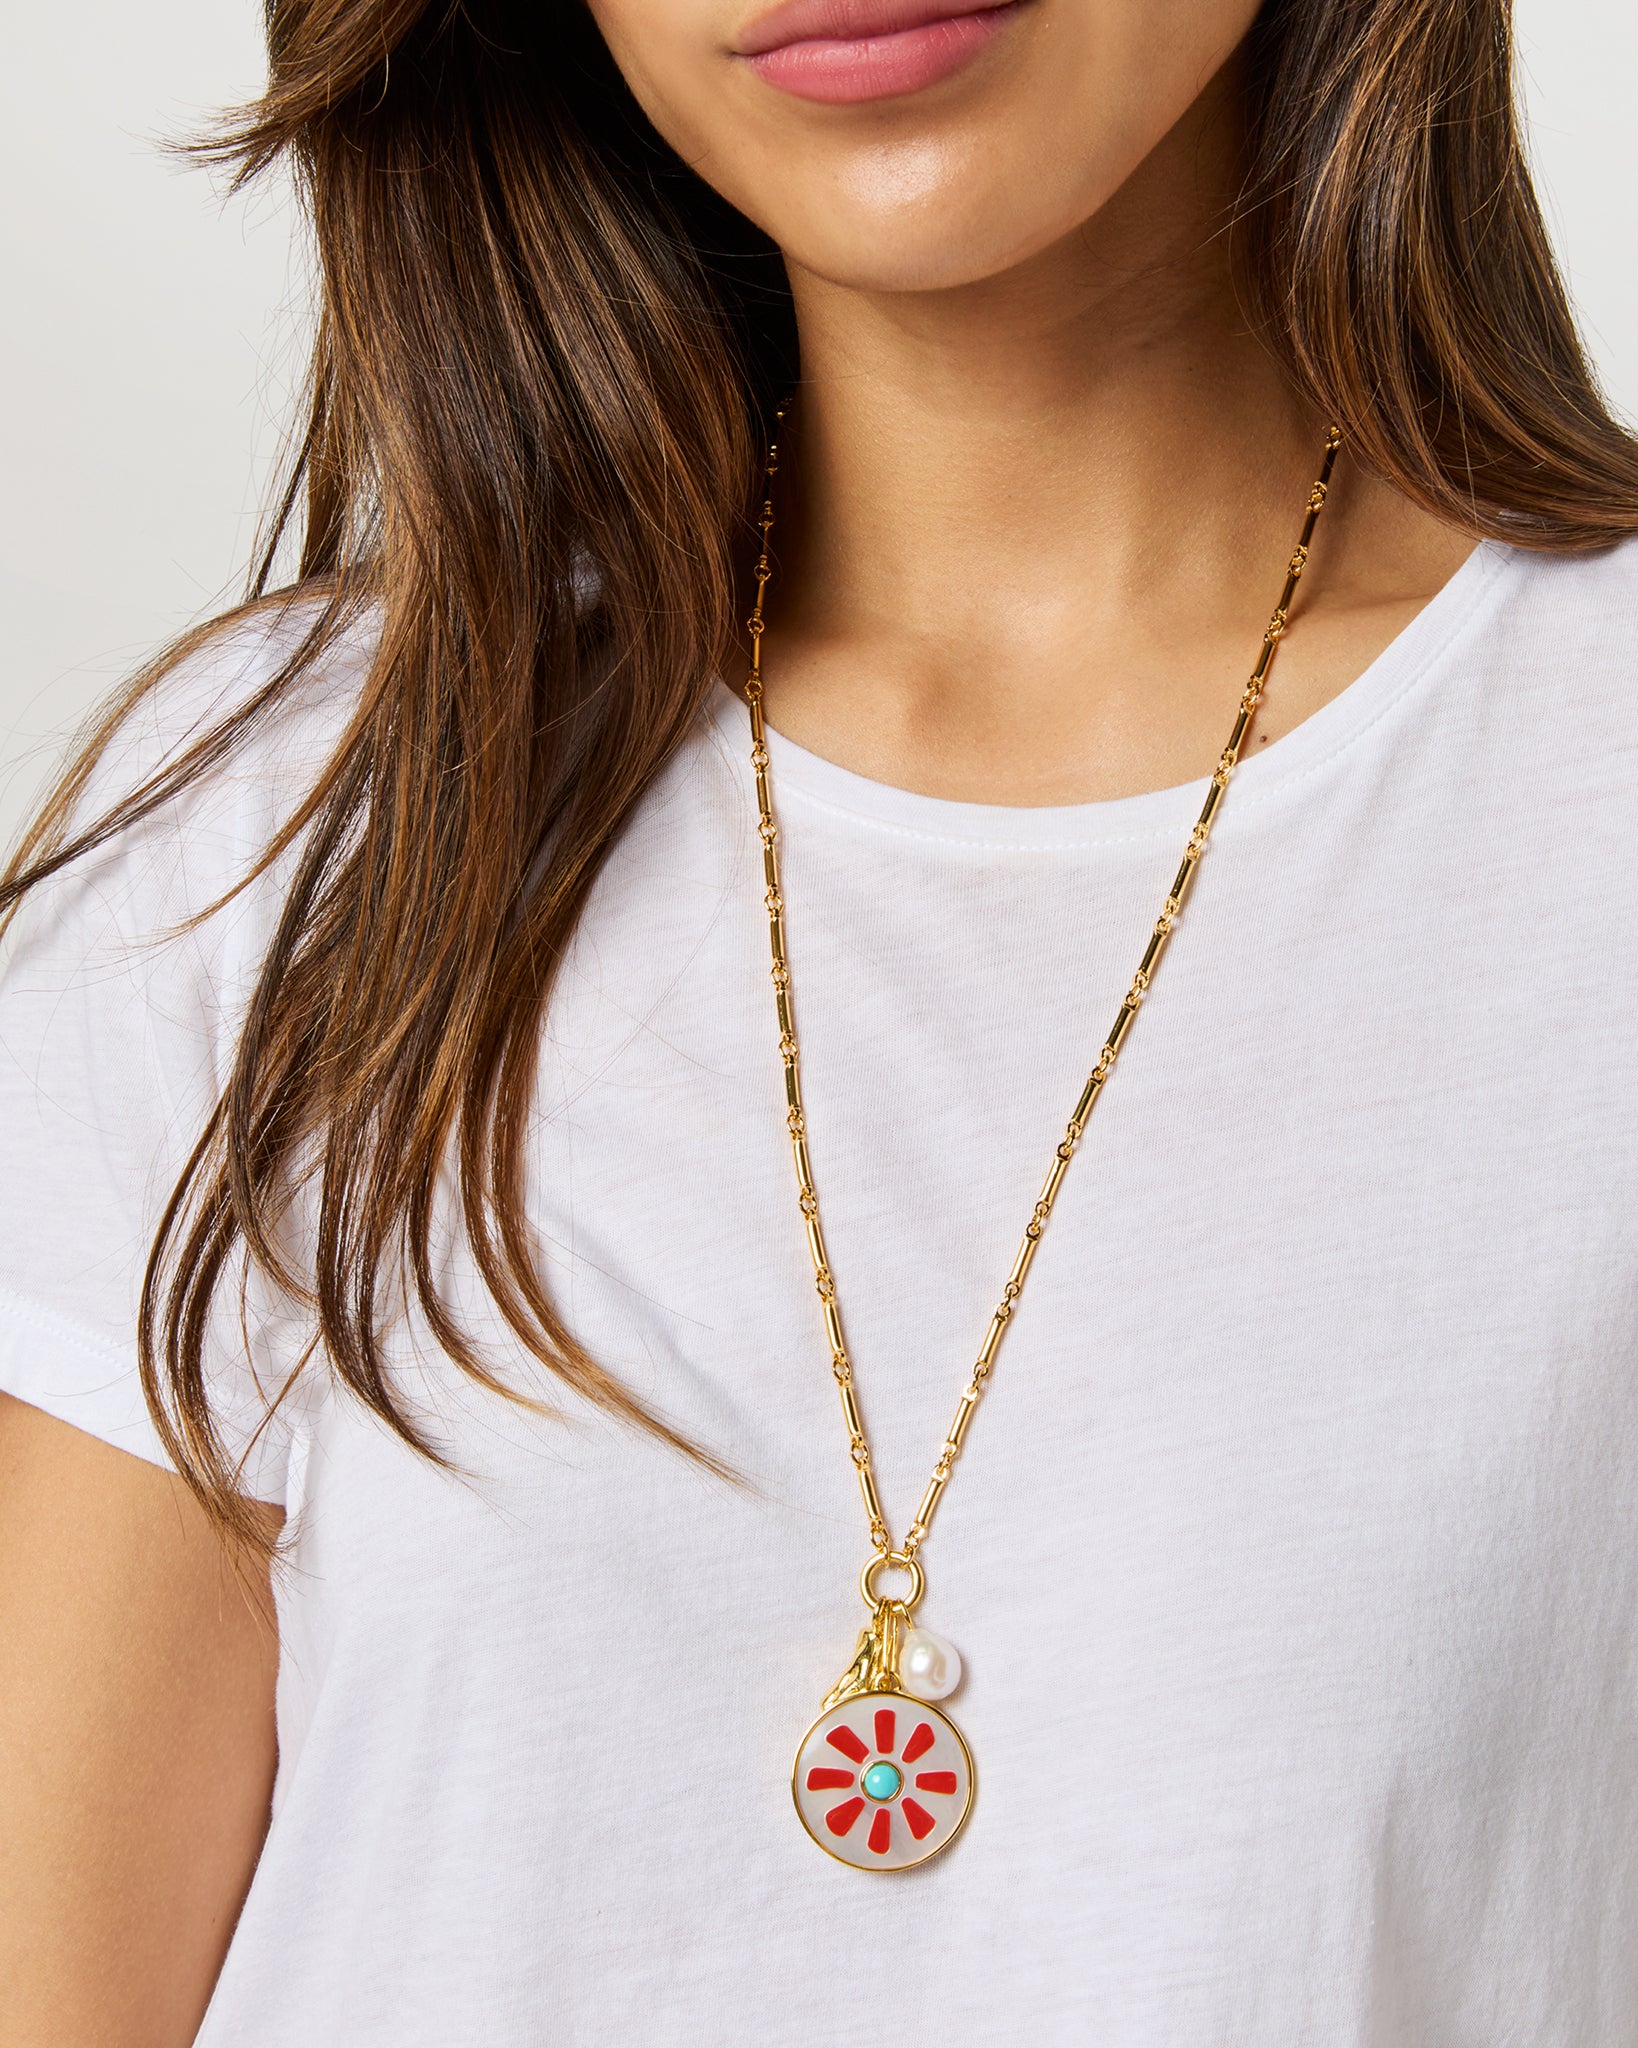 Equinox Charm Necklace in Multi